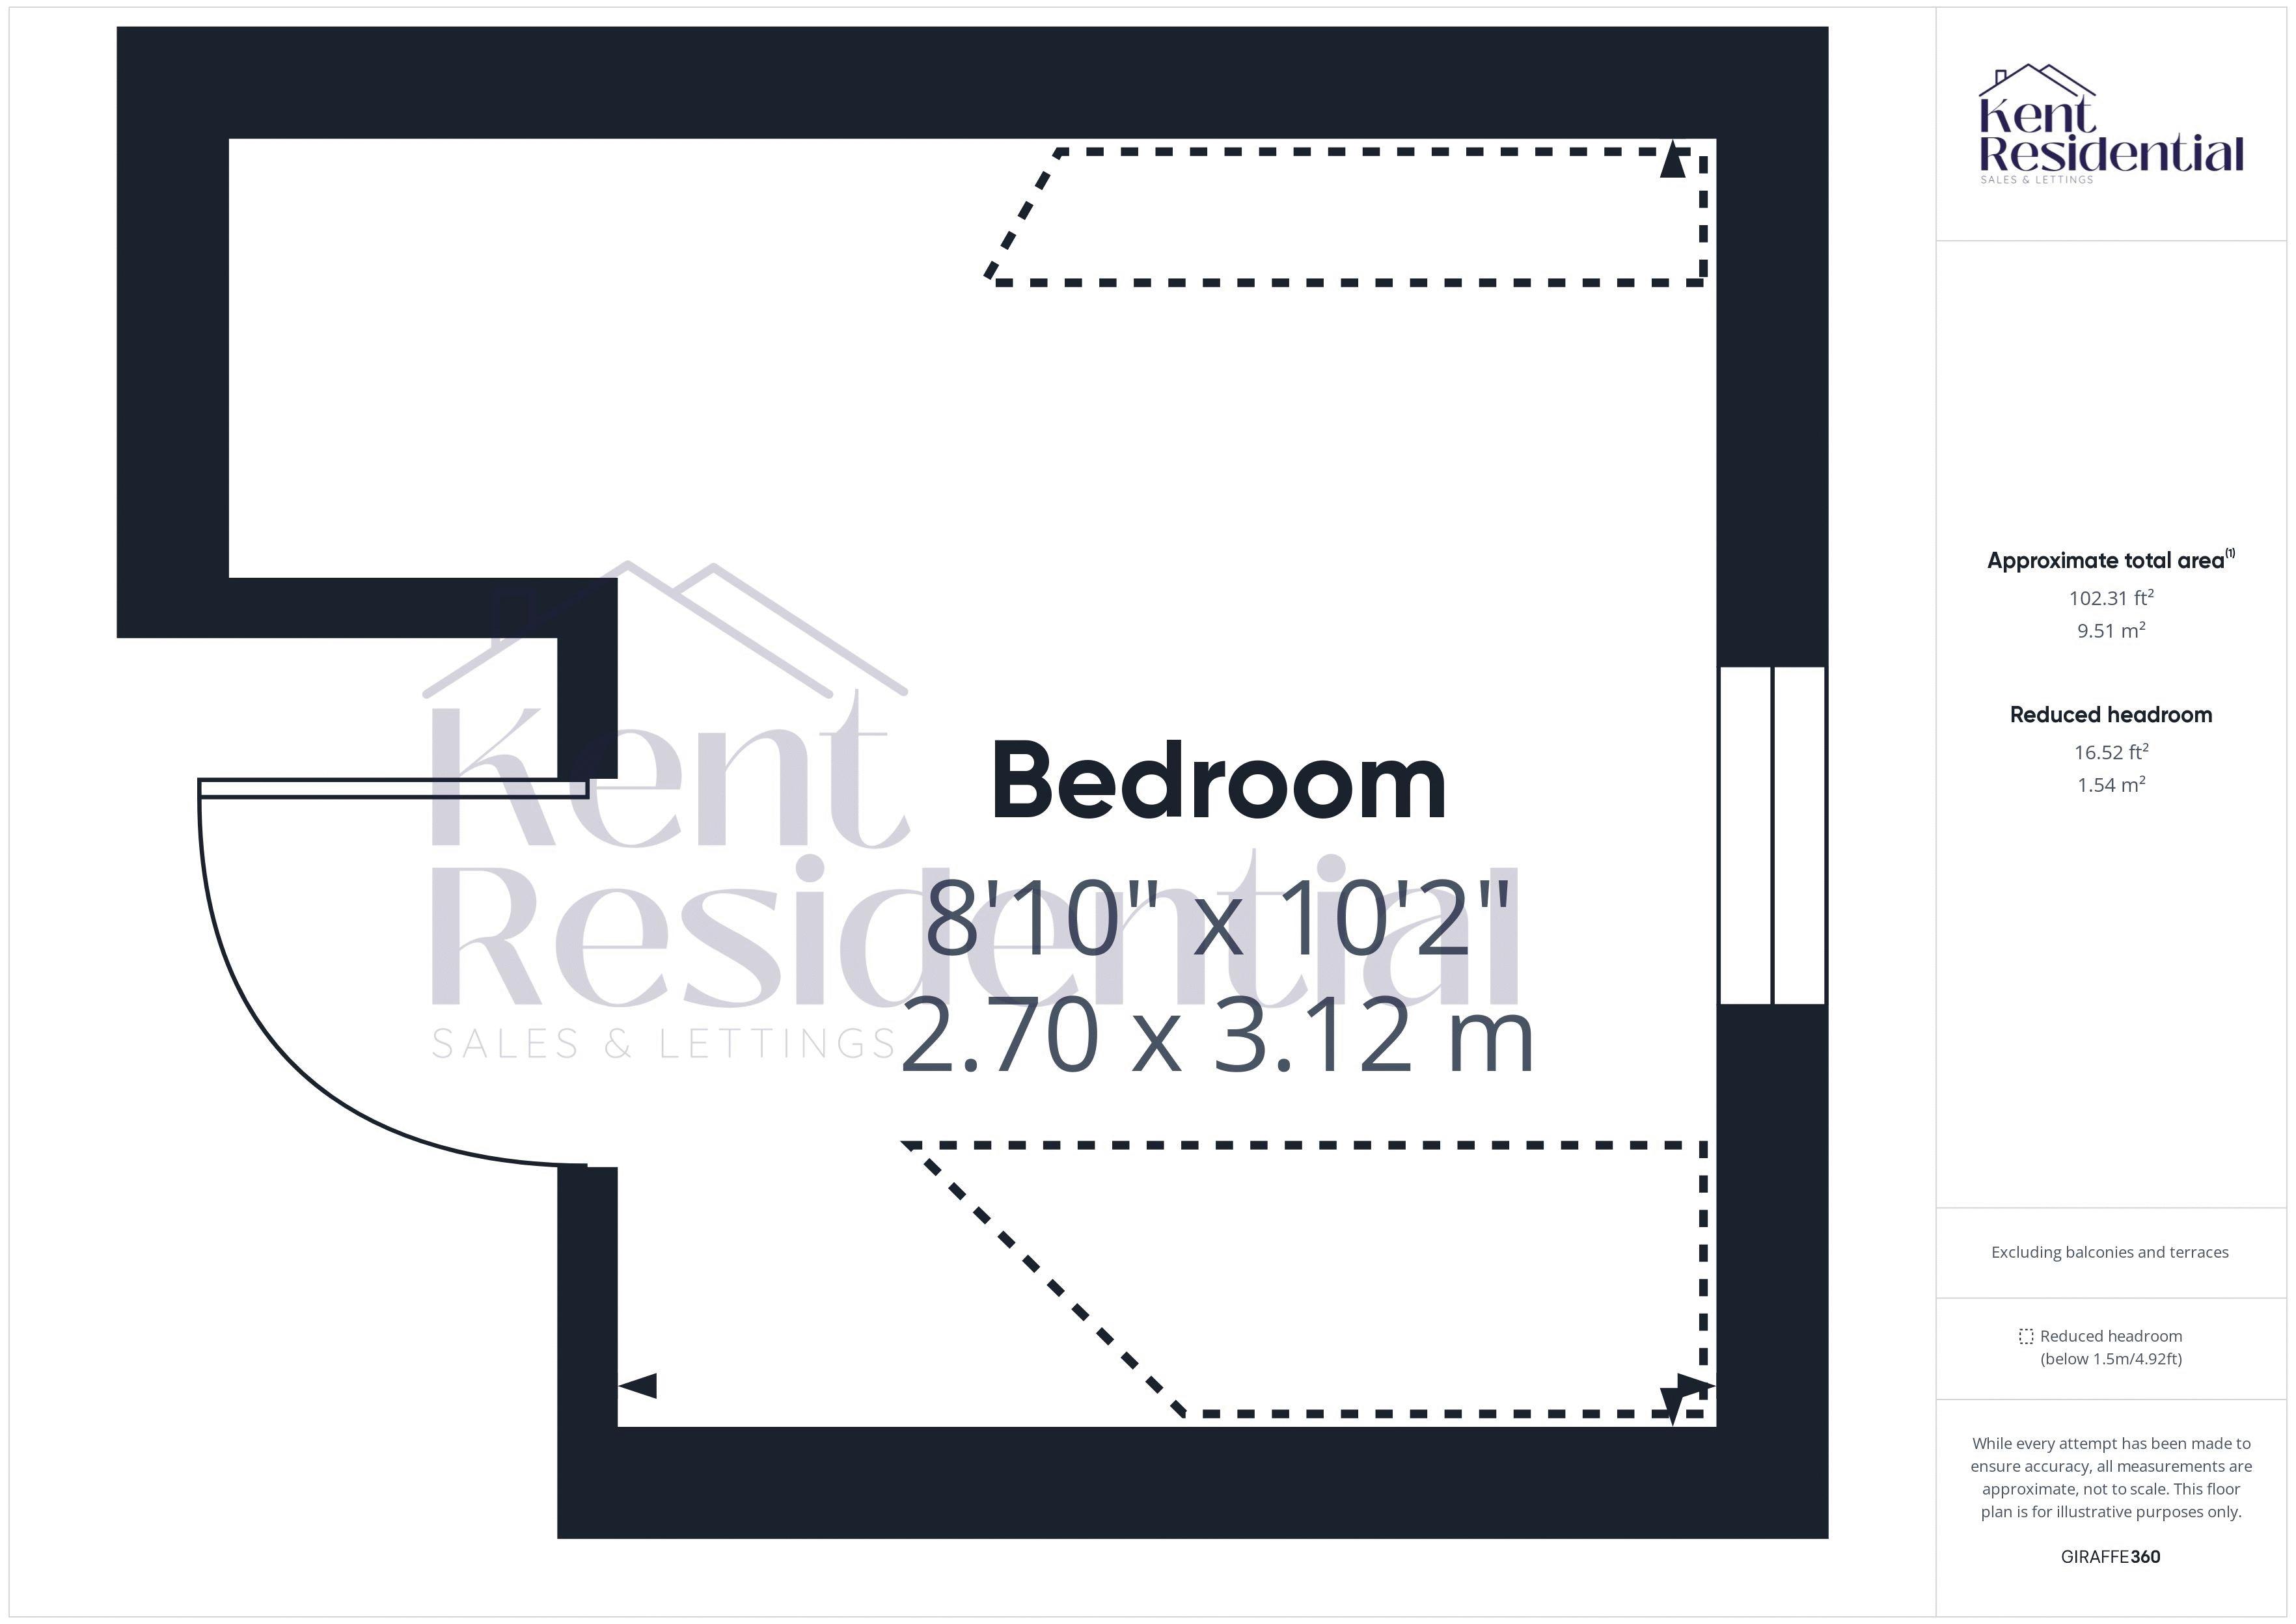 1 bed to rent in Nelsons Yard, Maidstone - Property floorplan